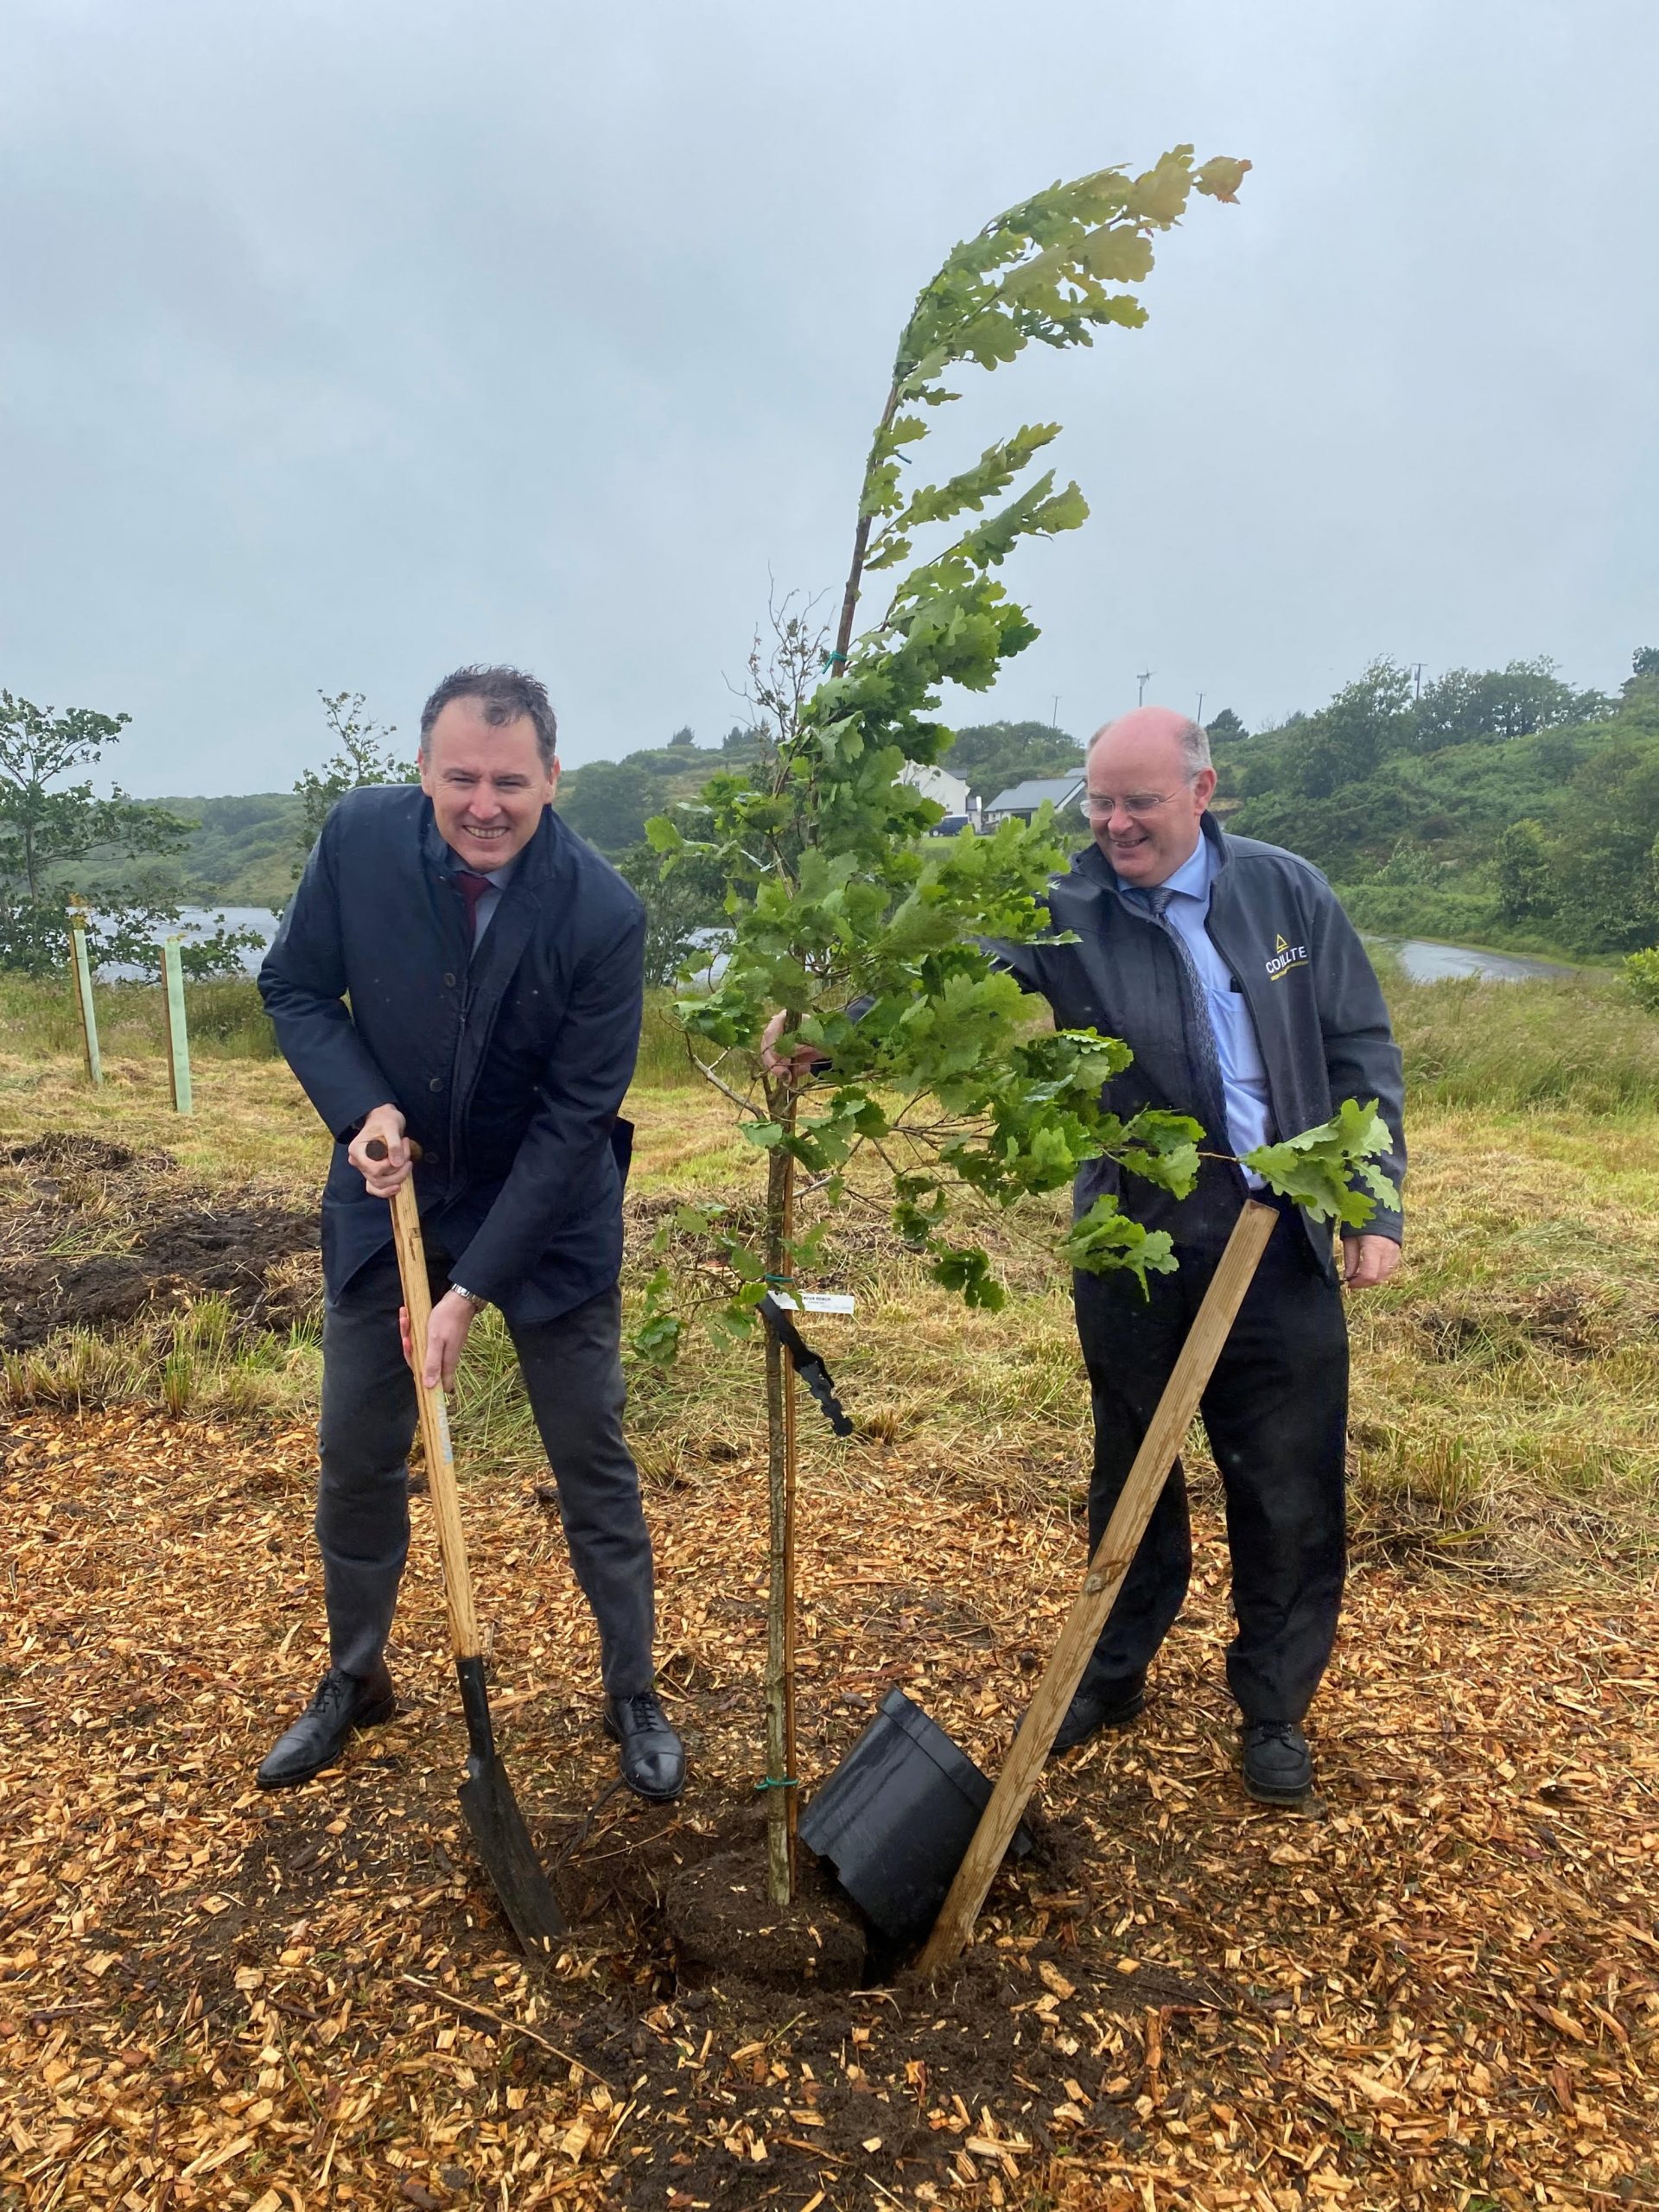 Minister Charlie McConalogue and Coillte's Regional Manager plant a tree to mark the opening of Coillte's Bonny Glen recreational forest